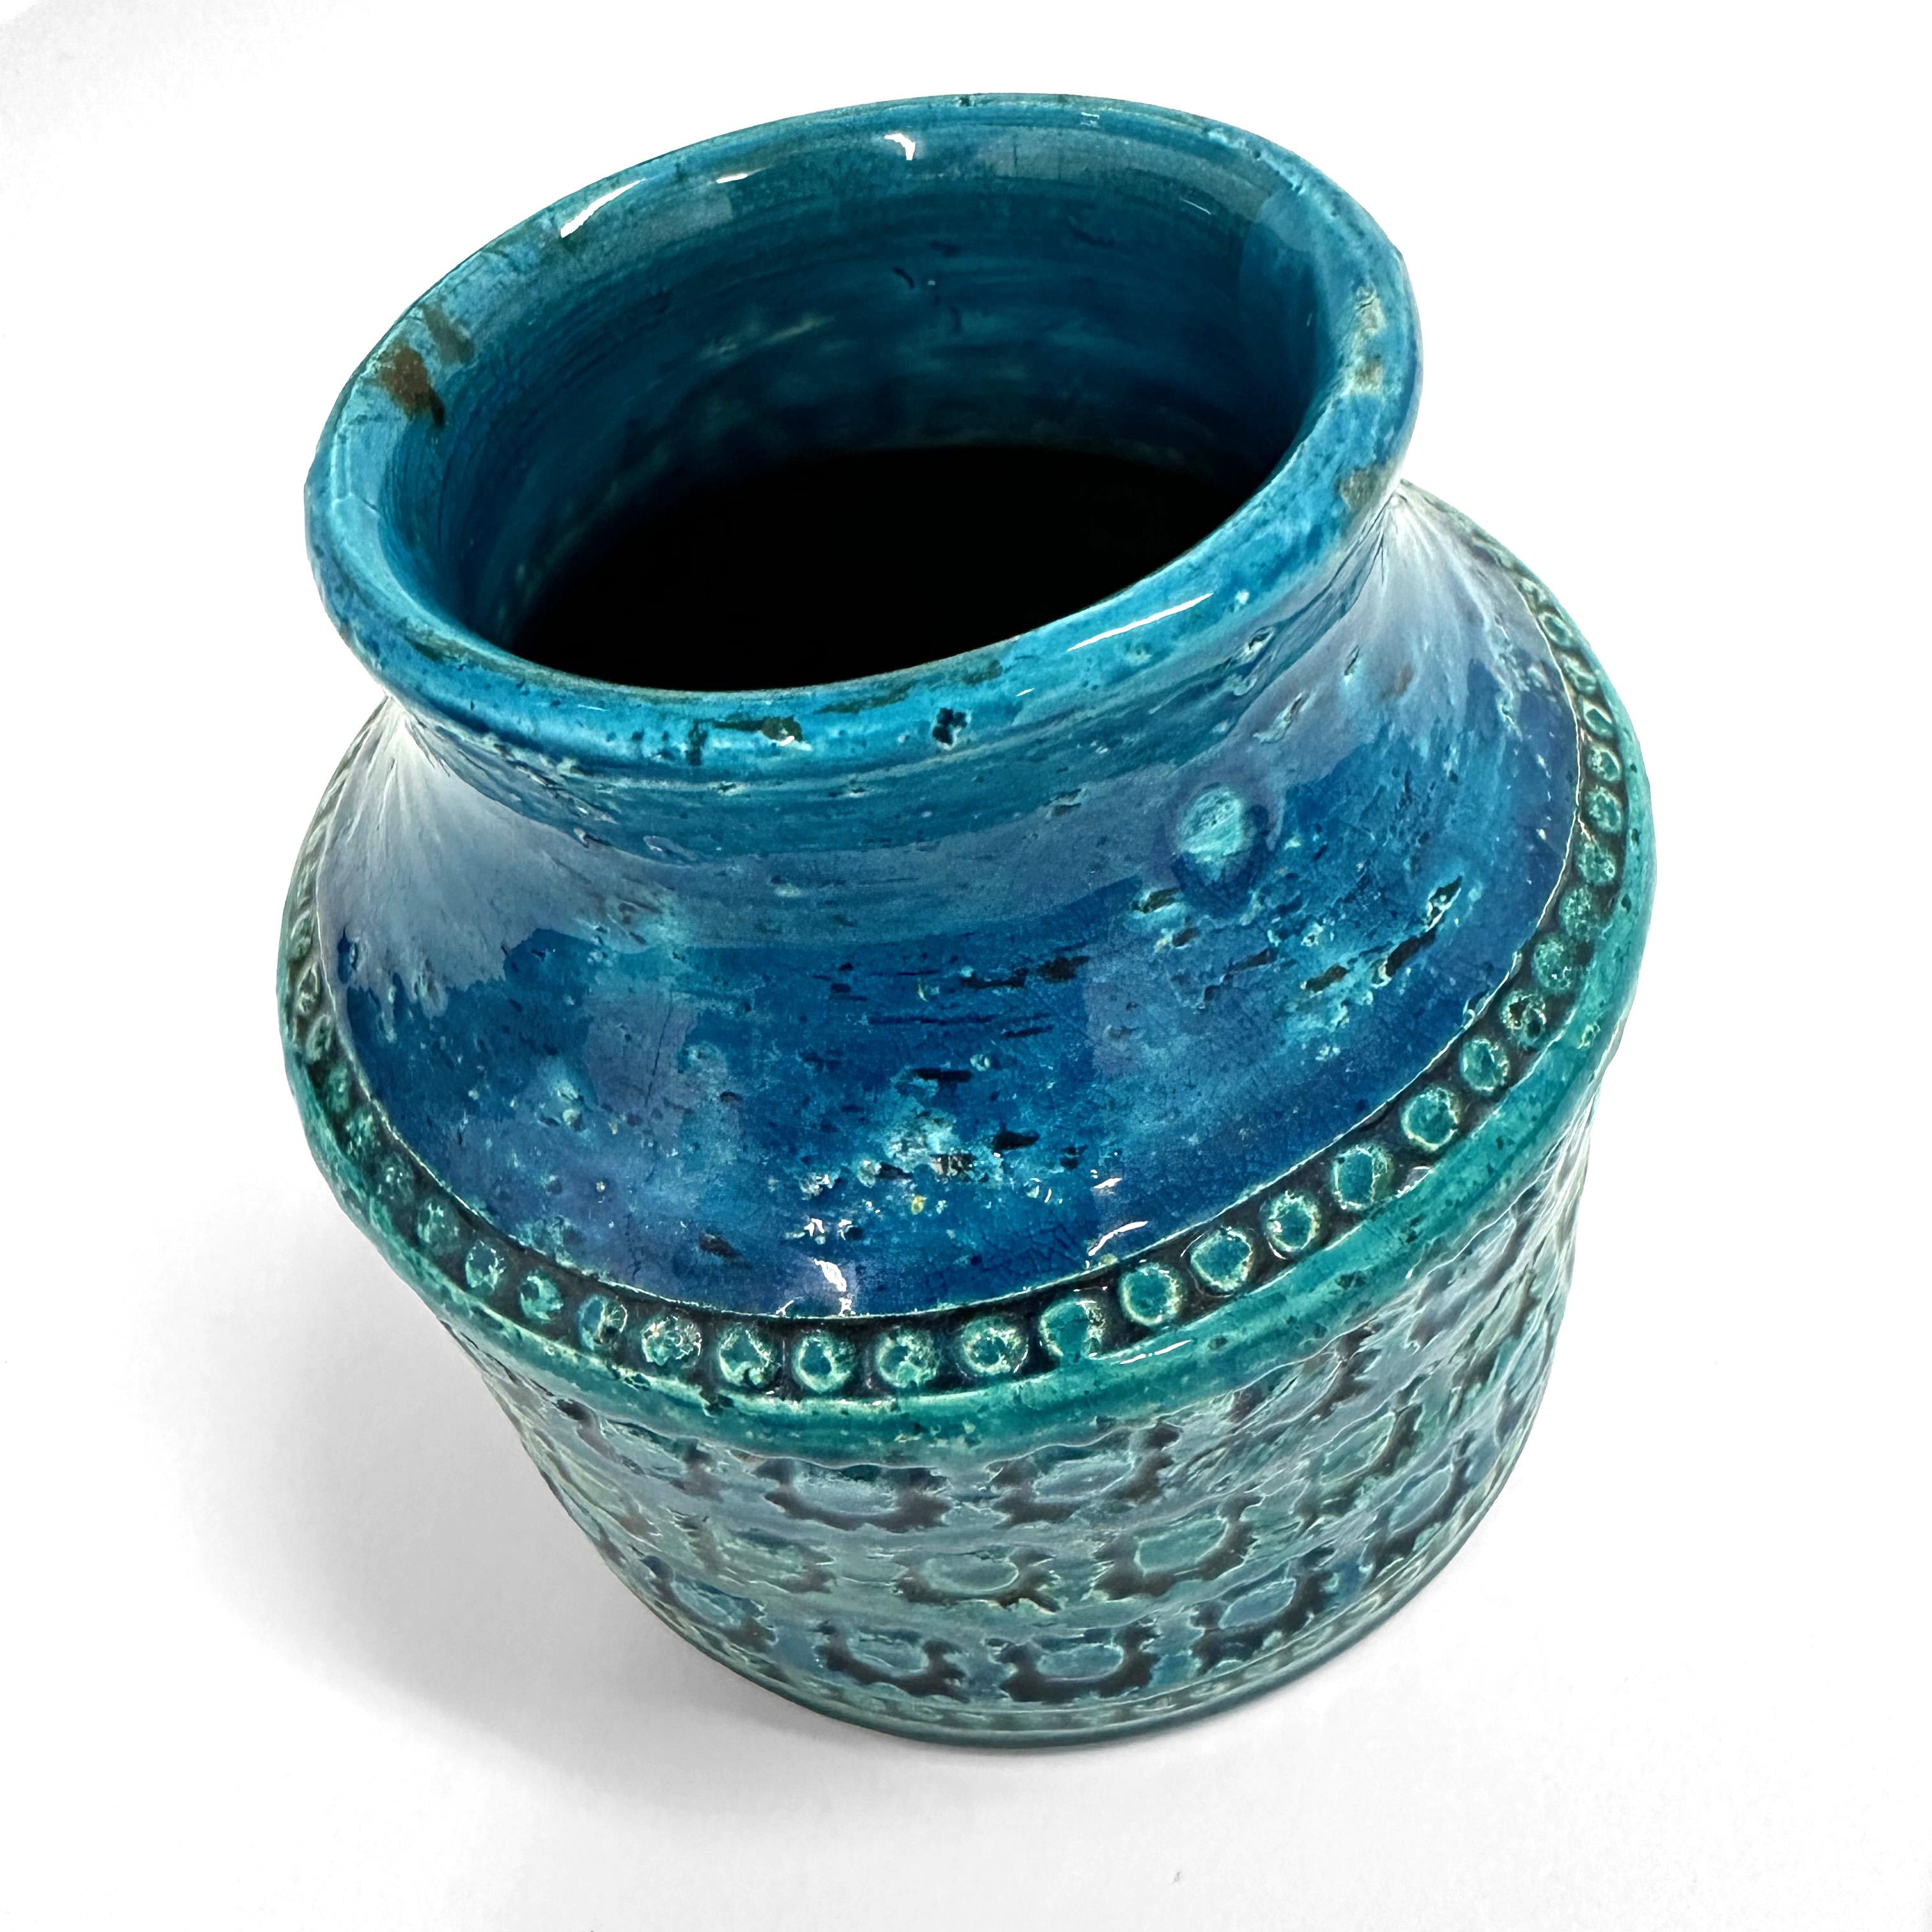 A wide-mouthed terracotta ceramic vase designed by Aldo Londi for Bitossi in Italy during the late 1950s or early 1960s.

Handcrafted in Italy with hand-stamped spectacular geometric designs in the glazed vibrant turquoise and cobalt blue that